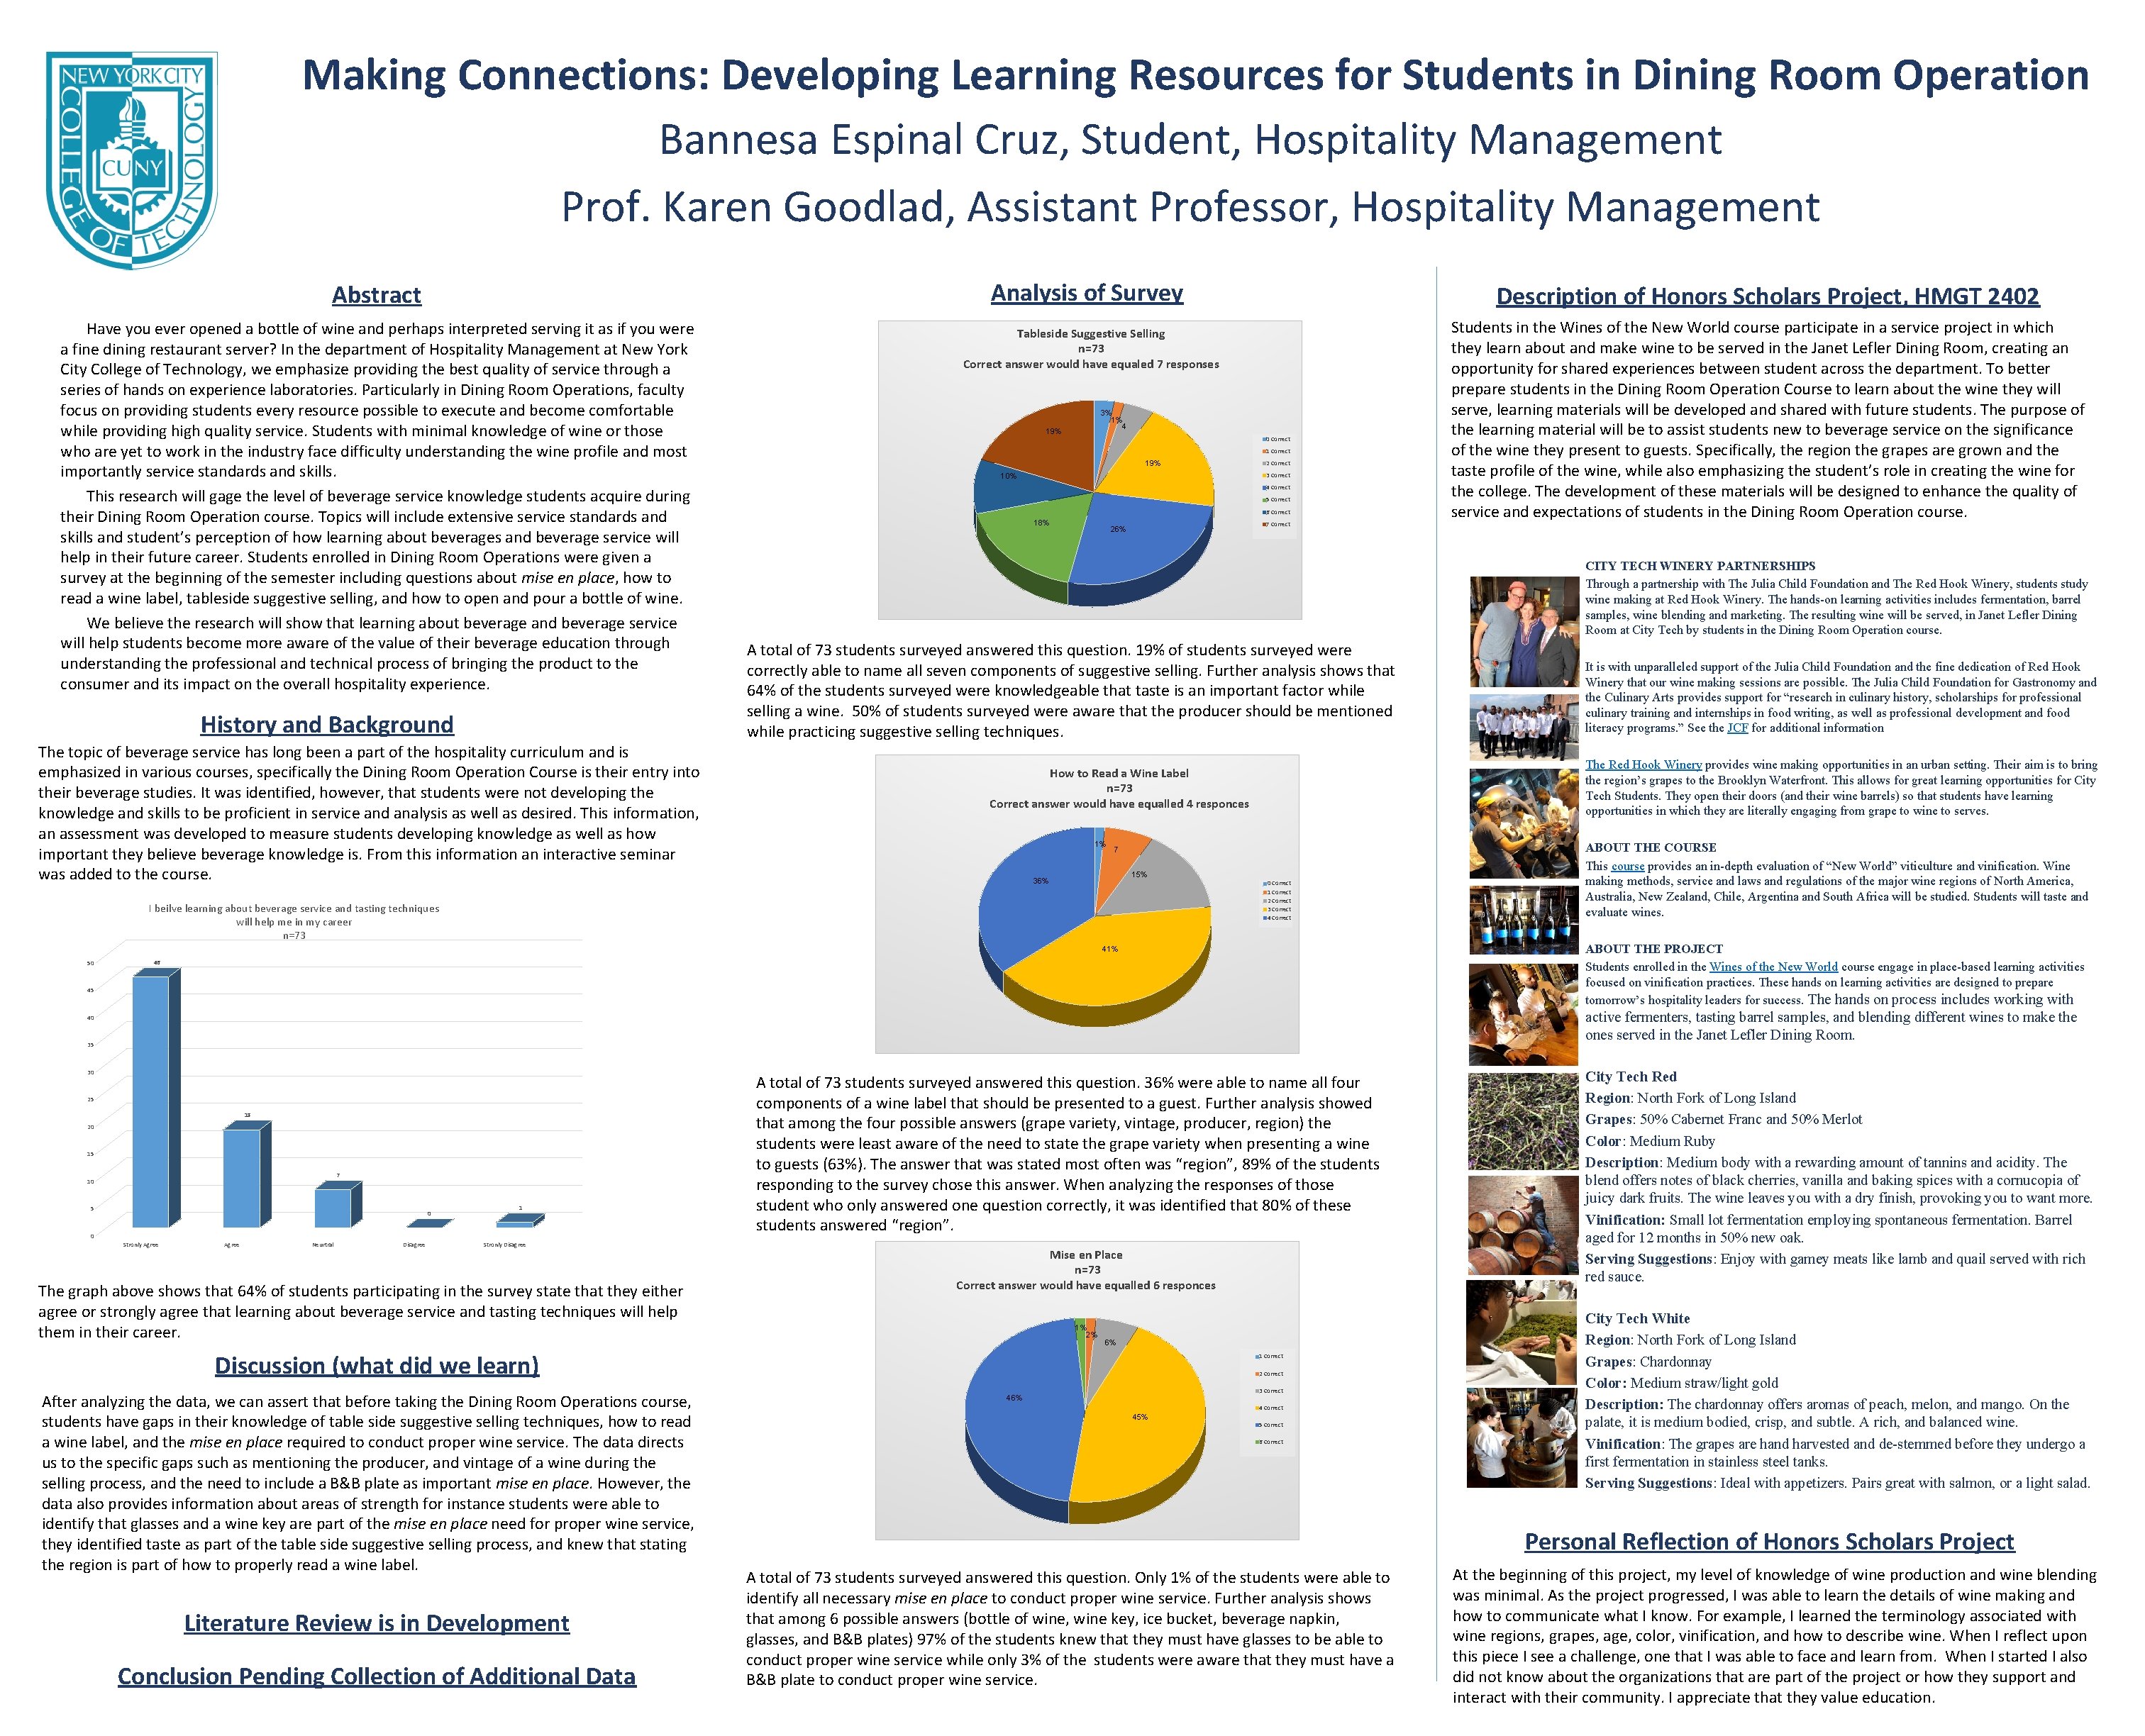 Making Connections: Developing Learning Resources for Students in Dining Room Operation Bannesa Espinal Cruz,